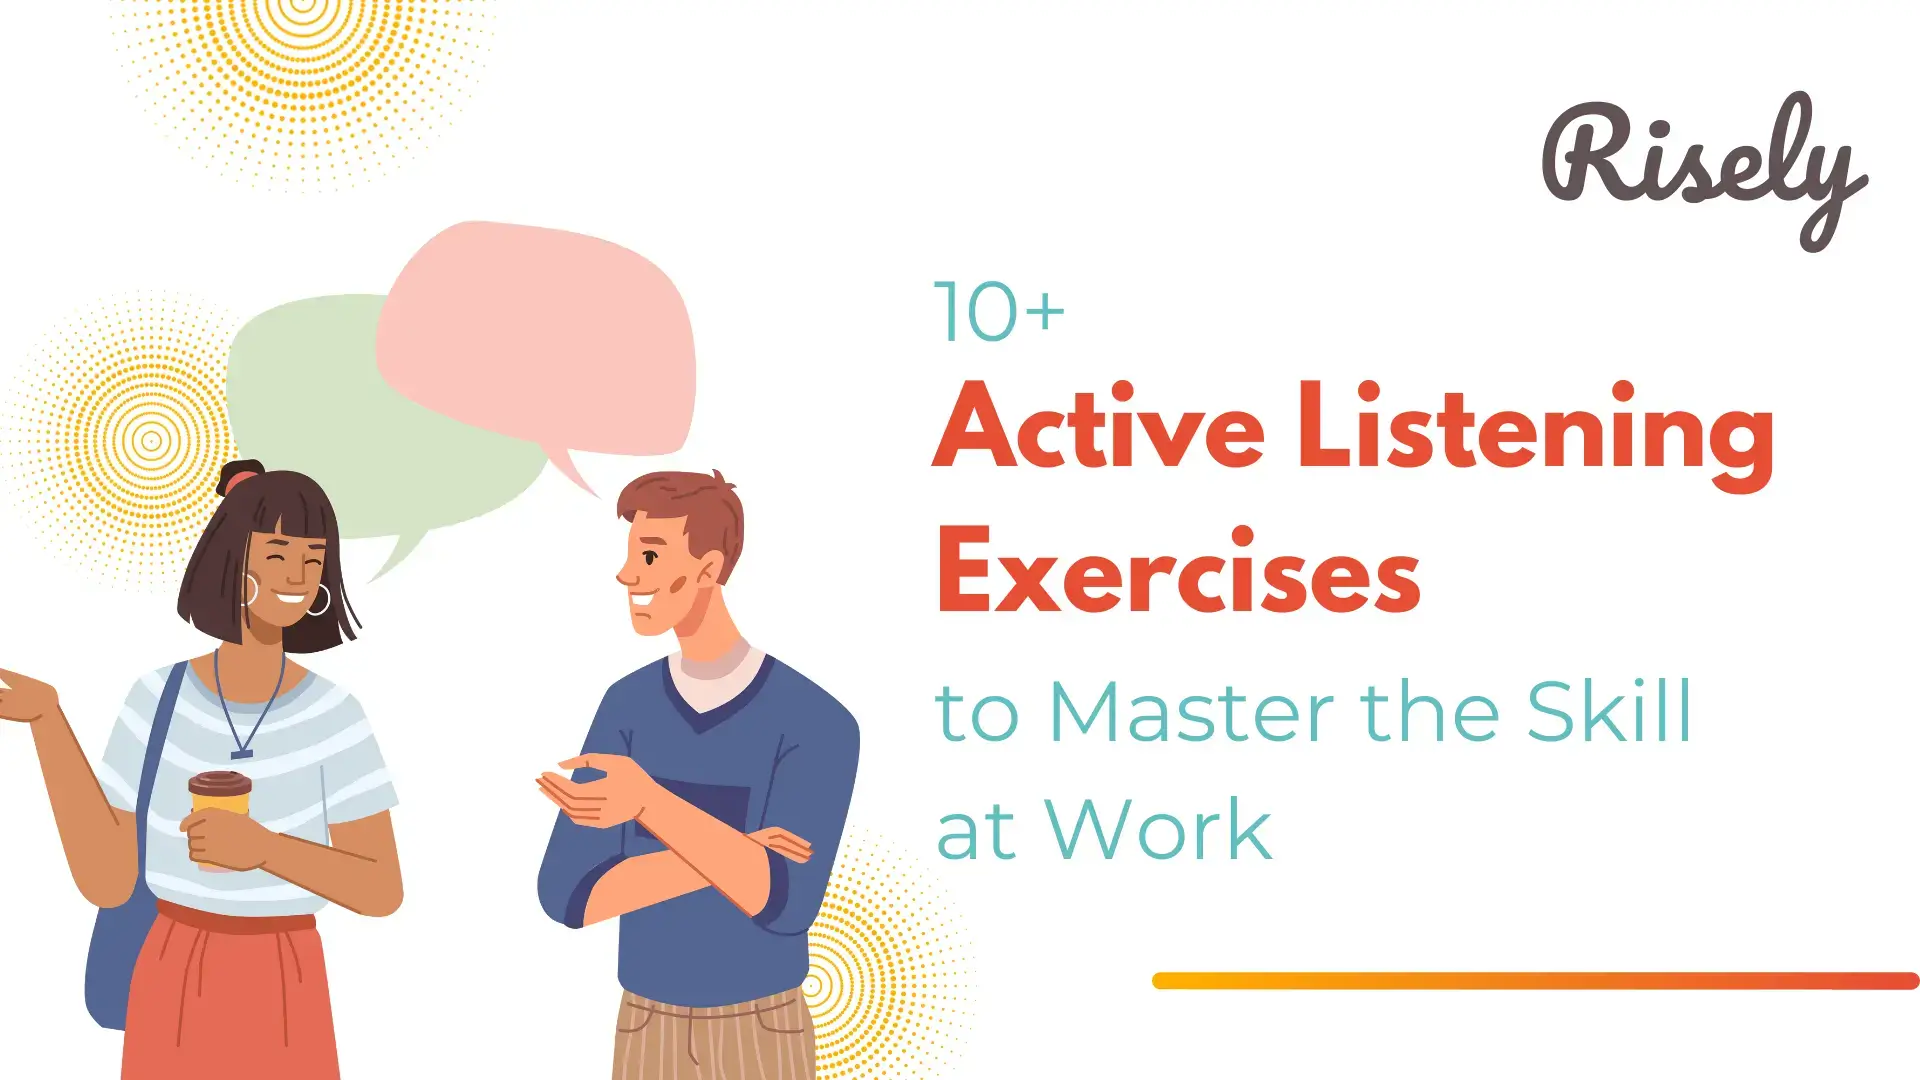 10+ Active Listening Exercises to Master the Skill at Work